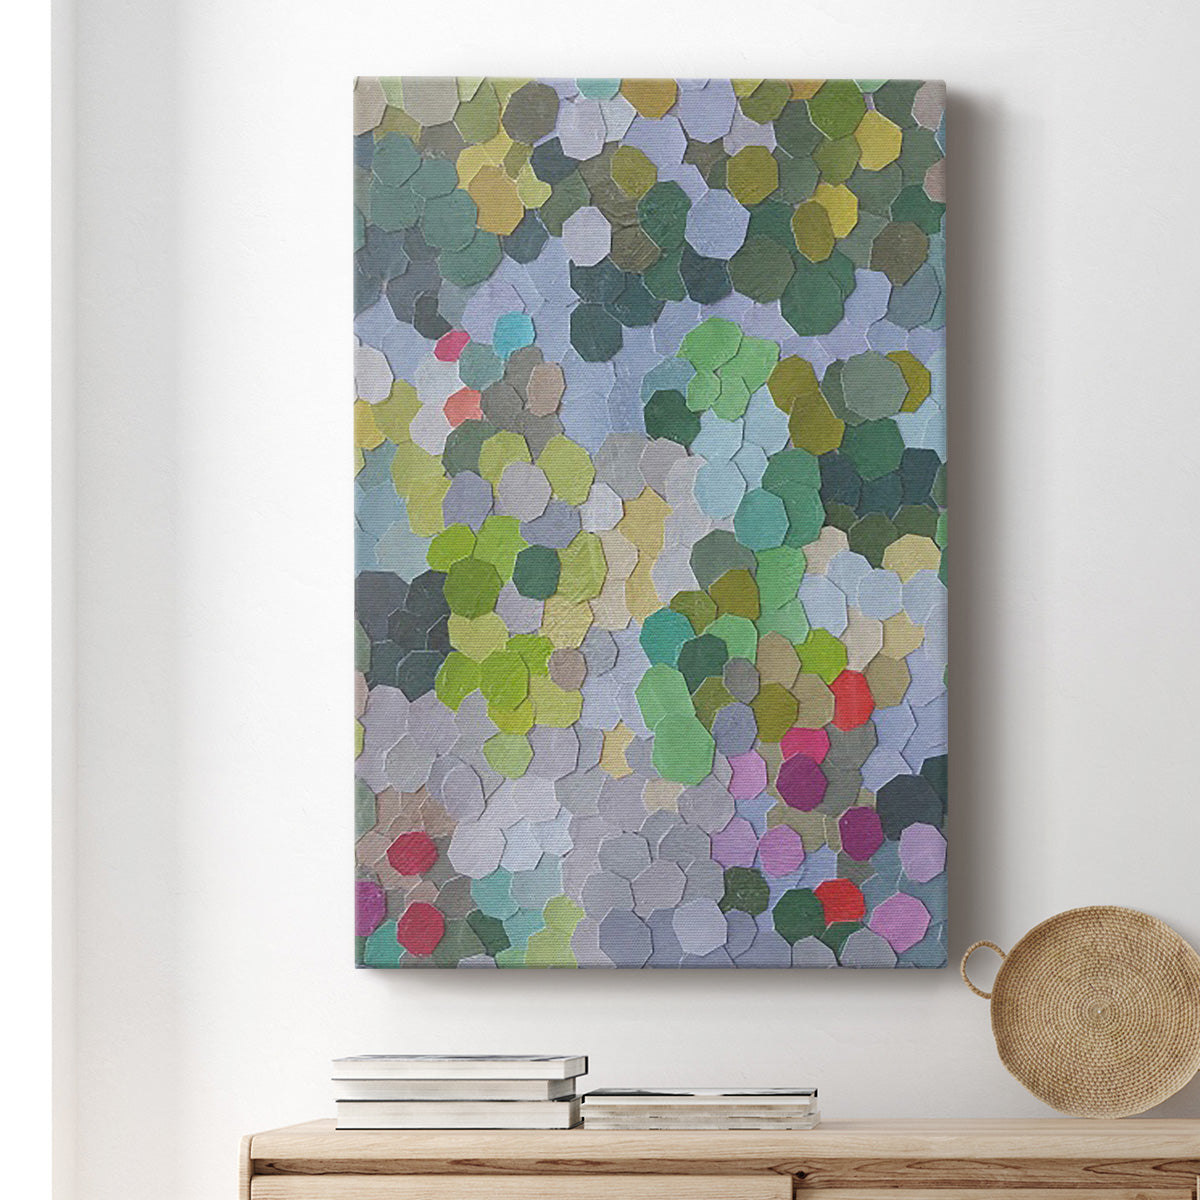 Huntington Gardens Premium Gallery Wrapped Canvas - Ready to Hang